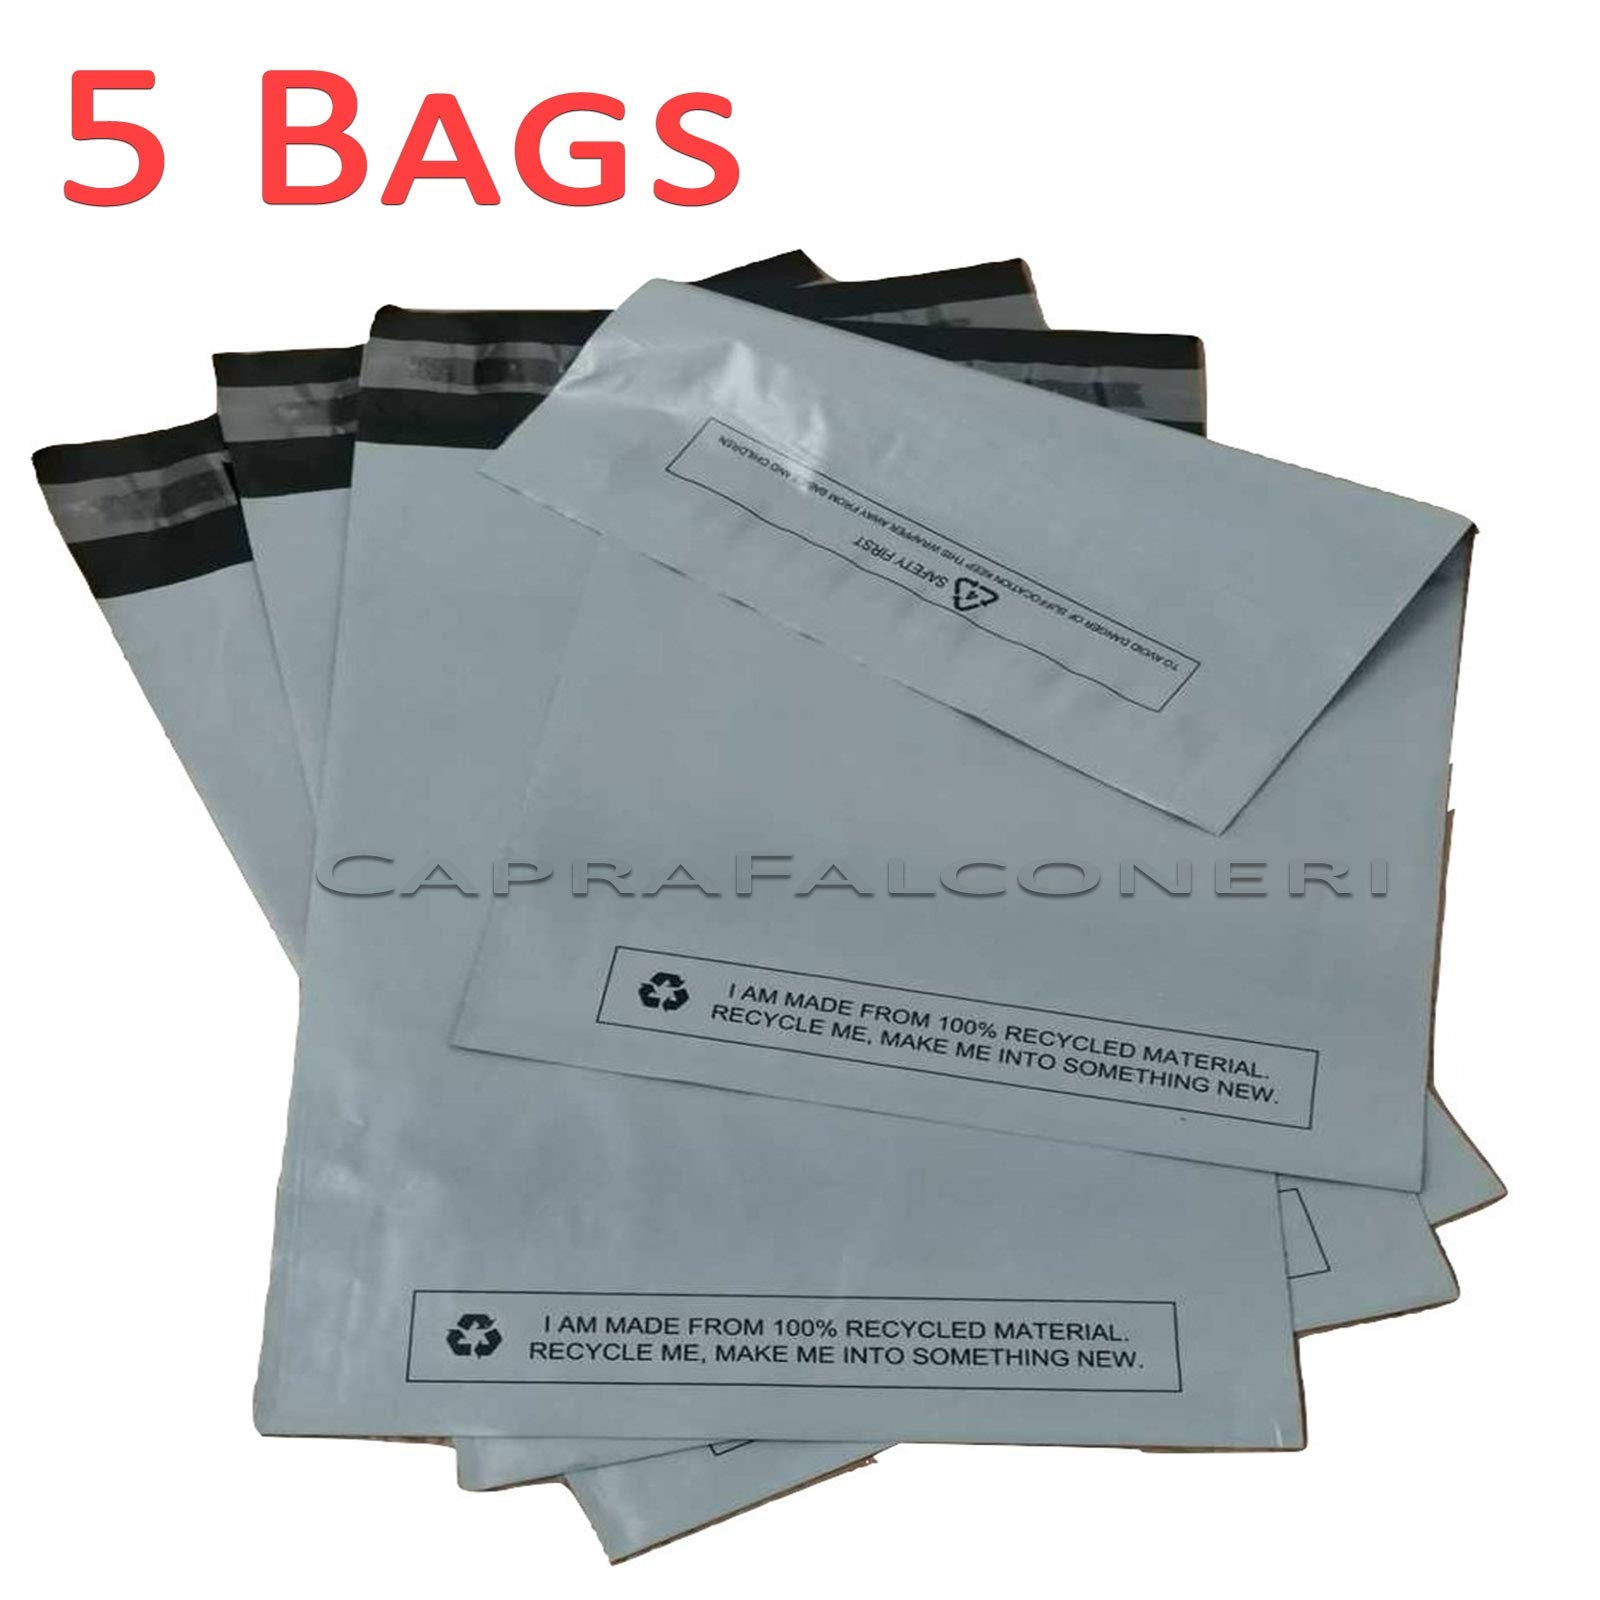 Large 5X Grey Mailing Bags 24 inches x 36 inches Polythene Self Seal Big Plastic Envelopes 100% Recyclable Strong Packaging Bags - Parcel Postal Postage Packaging Bags